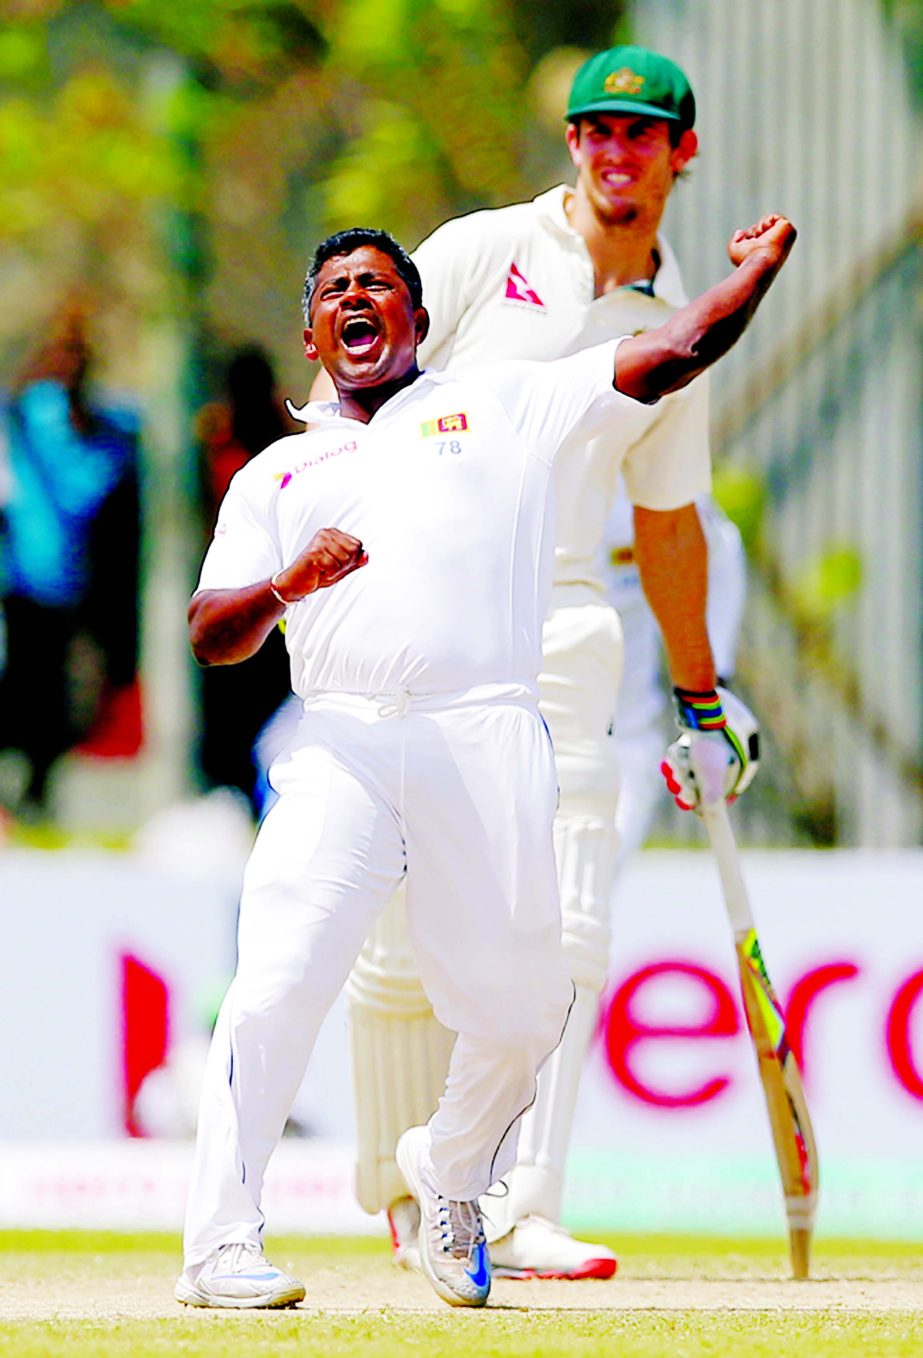 Sri Lanka's Rangana Herath celebrates the wicket of Australia's Peter Nevill as non striker Mitchell Marsh watches on day two of their second Test cricket match in Galle, Sri Lanka on Friday.